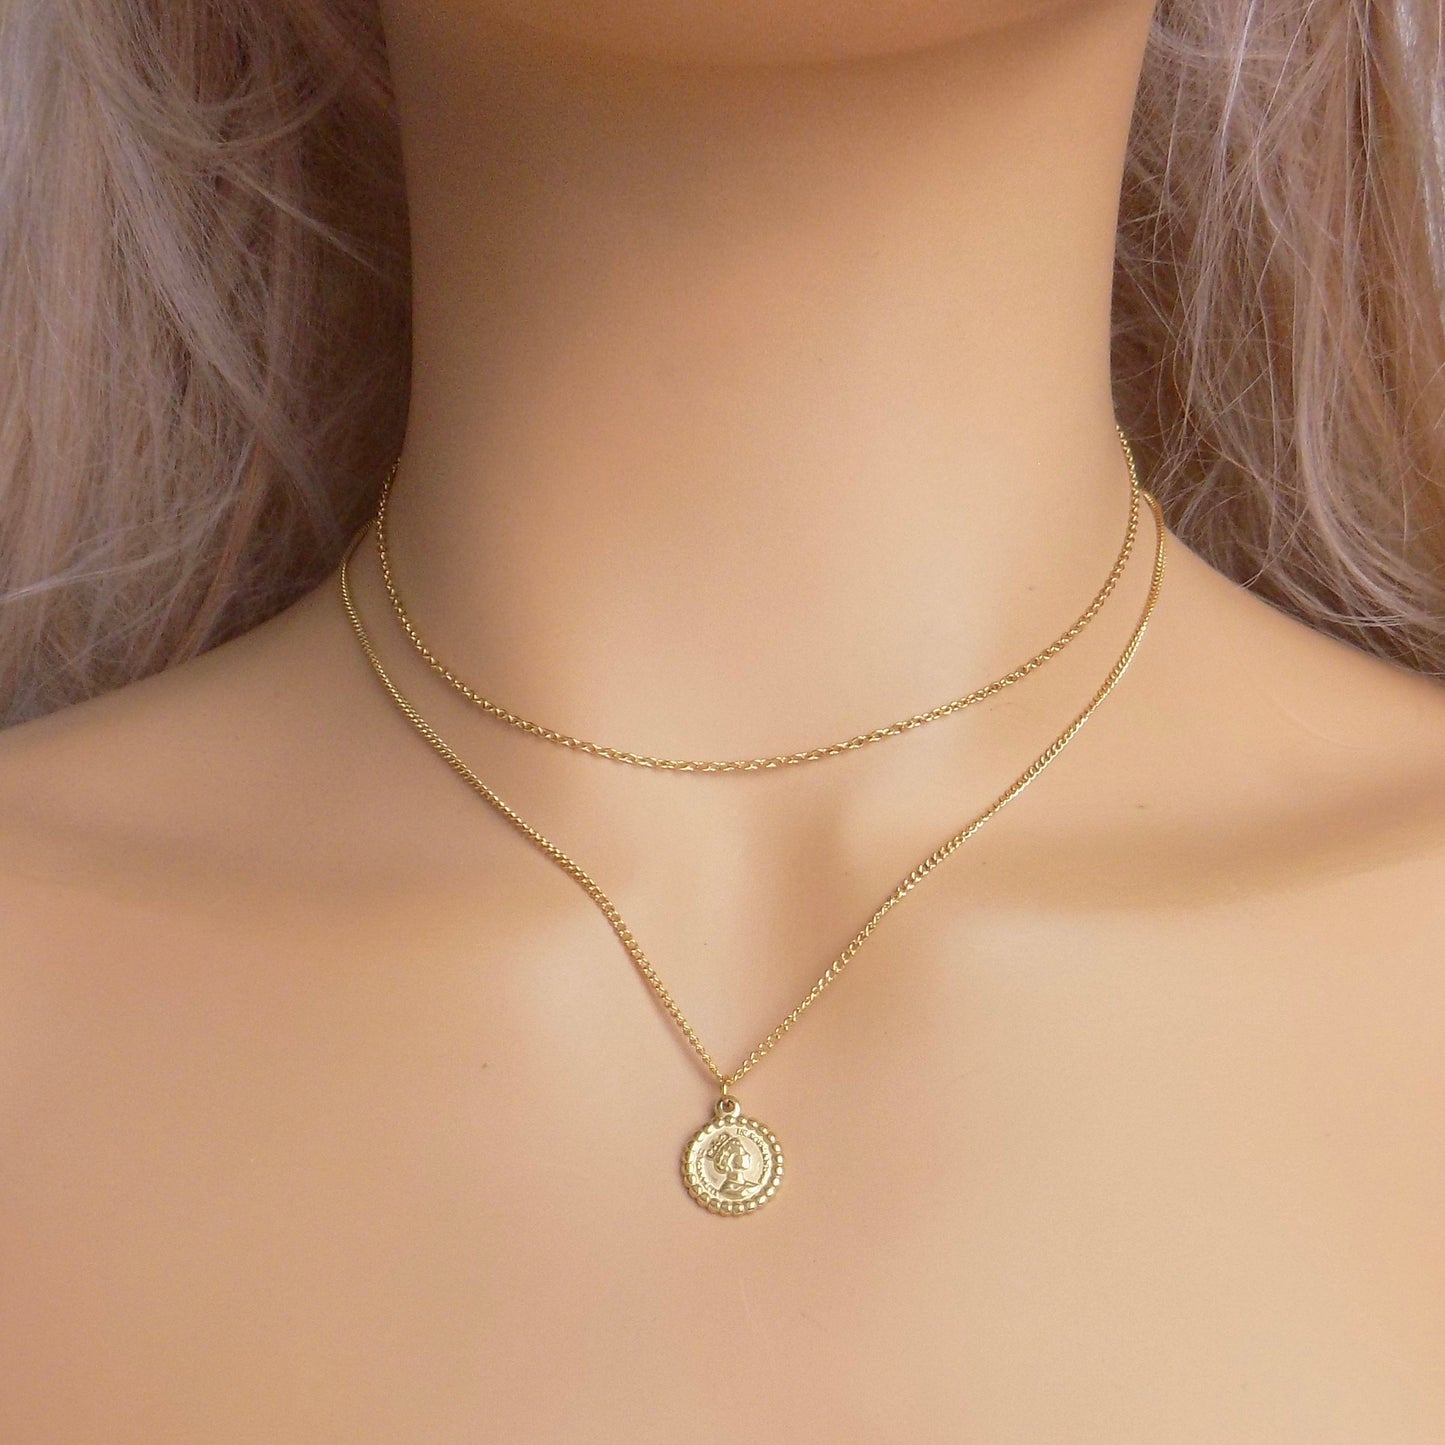 Dainty Chain Necklace Set of Two, Gold Coin Necklace, 18K Gold Stainless Steel, Minimalist Jewelry, M7-83